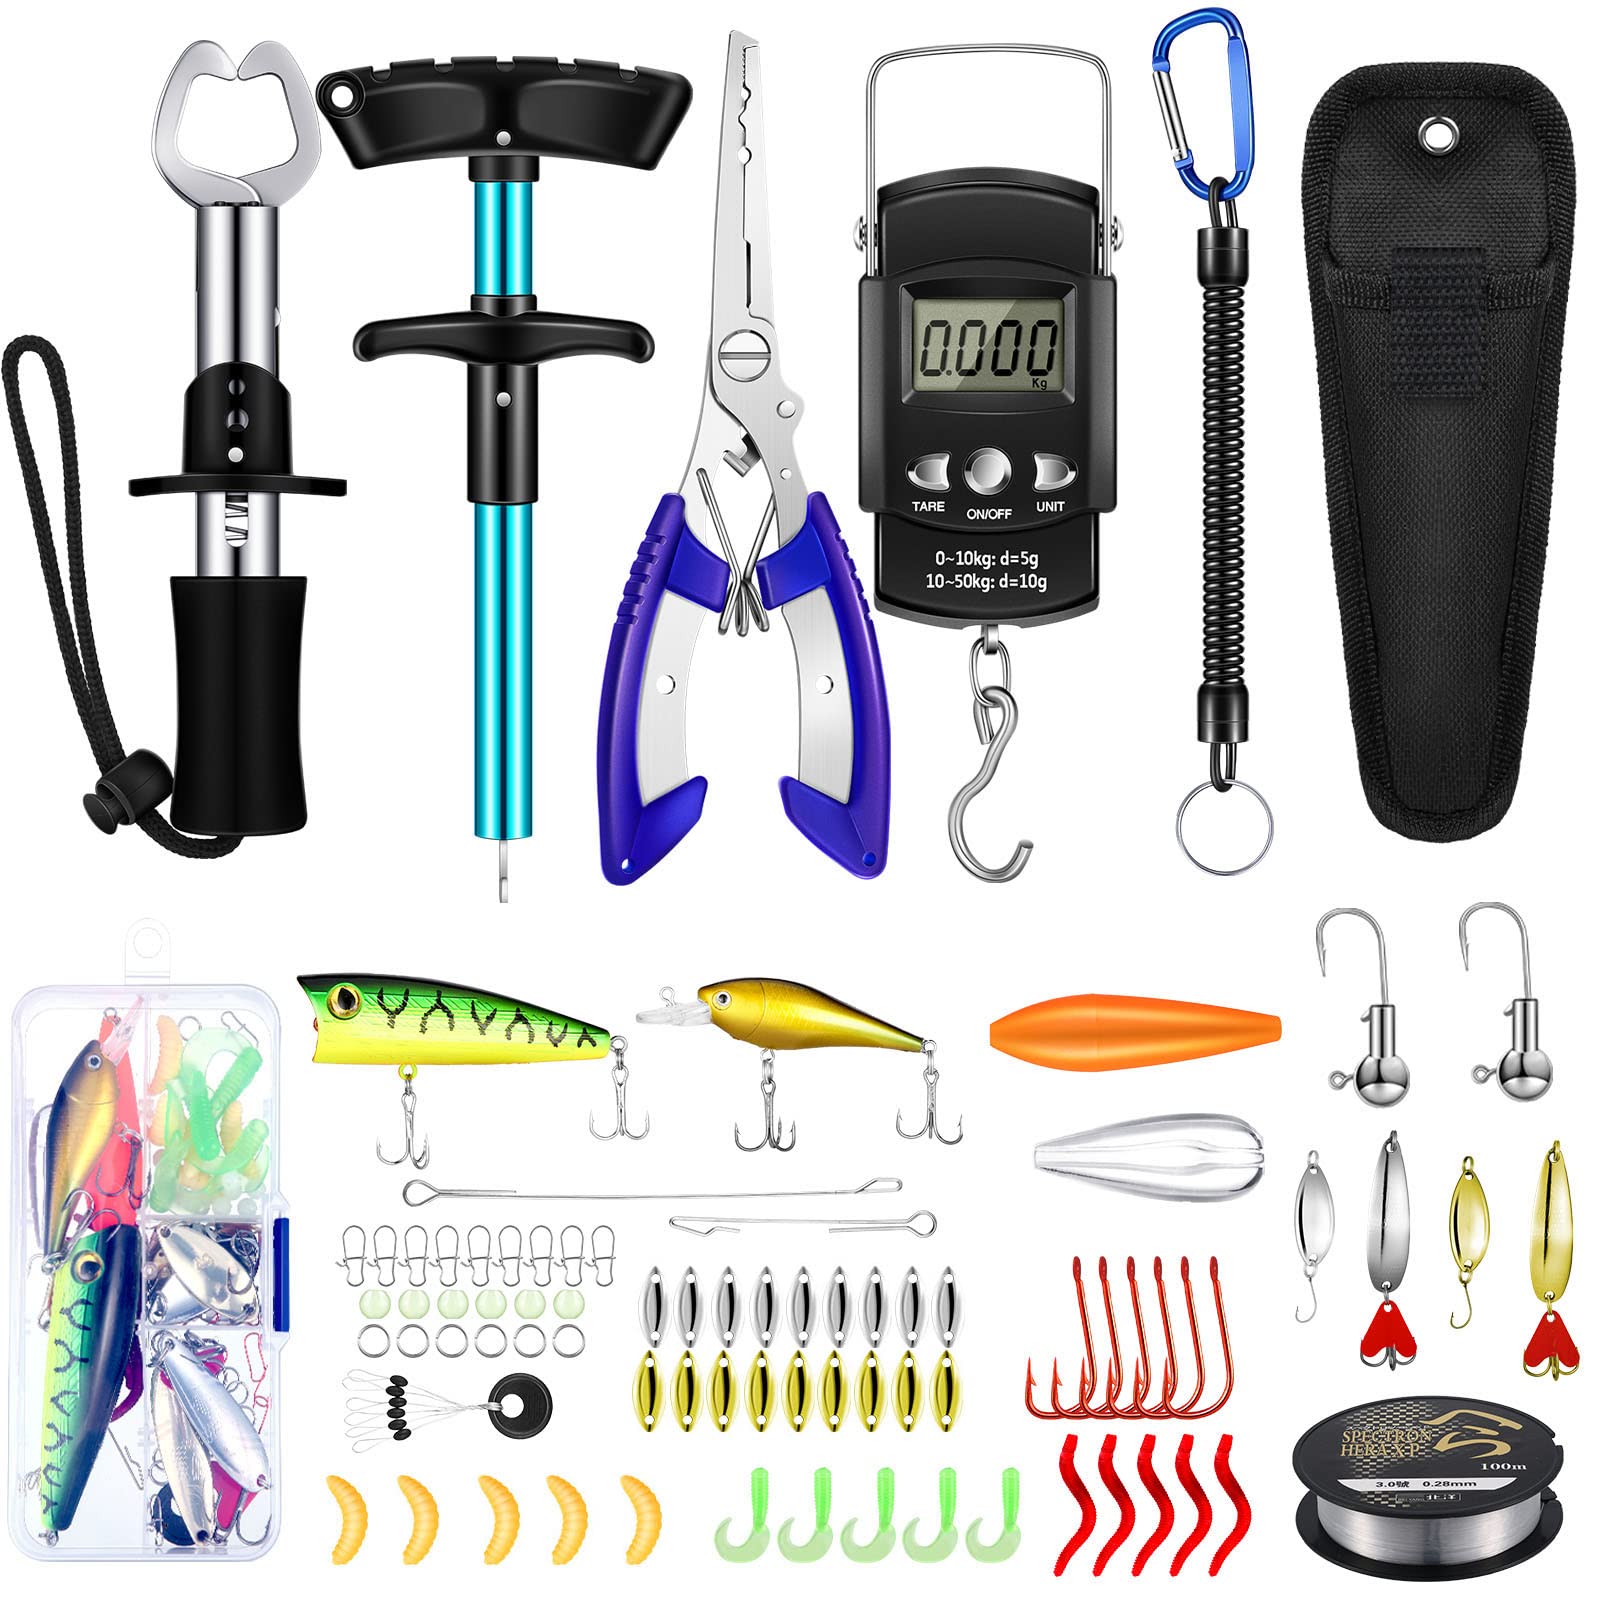 Complete 8-Piece Fishing Tool Kit Set with Gripper, Pliers, Digital Scale,  Left Hand Glove, and Knot Tying Tool